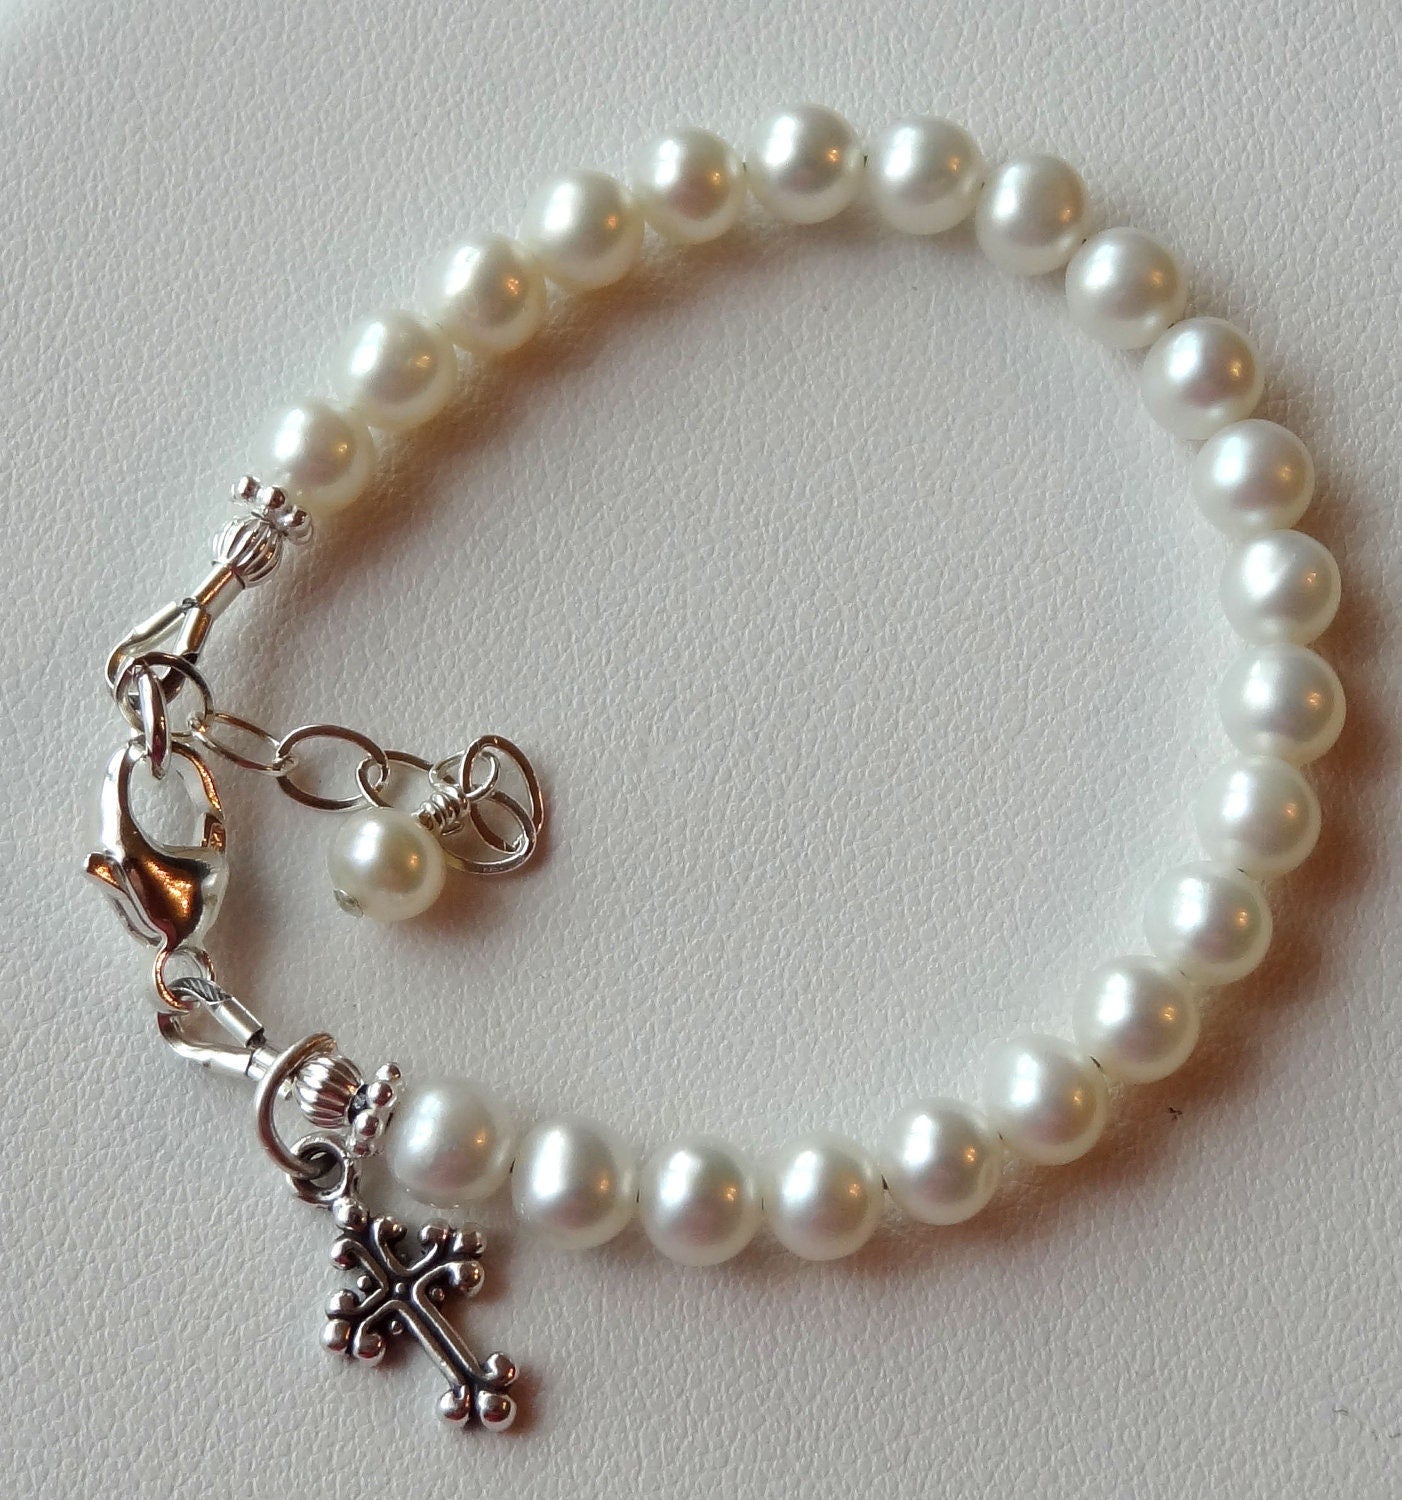 Real Freshwater Pearl Baby Toddler Cross Bracelet,First Communion Confirmation Cross Pearl Bracelet Freshwater Pearl Baptism Bracelet